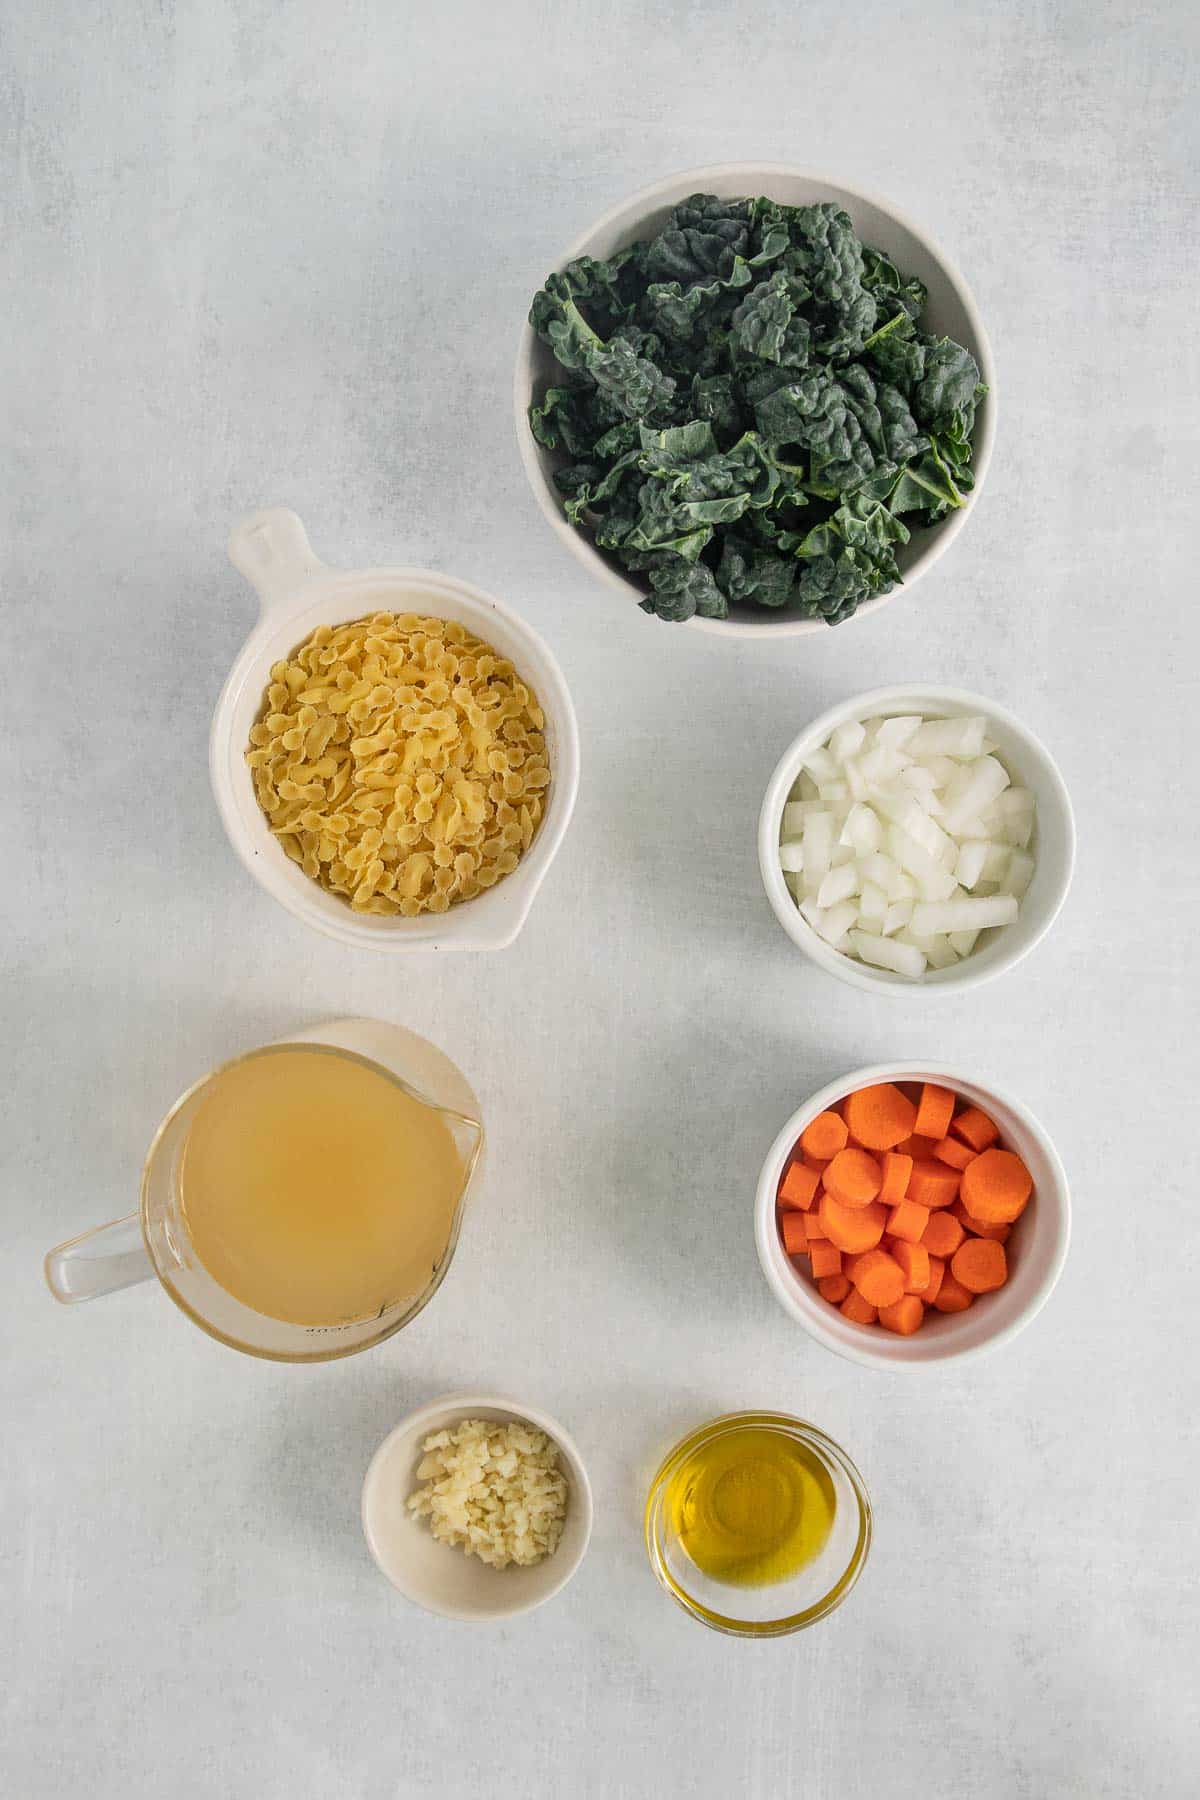 several bowls with ingredients for Italian wedding soup - kale, sliced carrots, diced onions, broth, minced garlic, oil, and pasta.